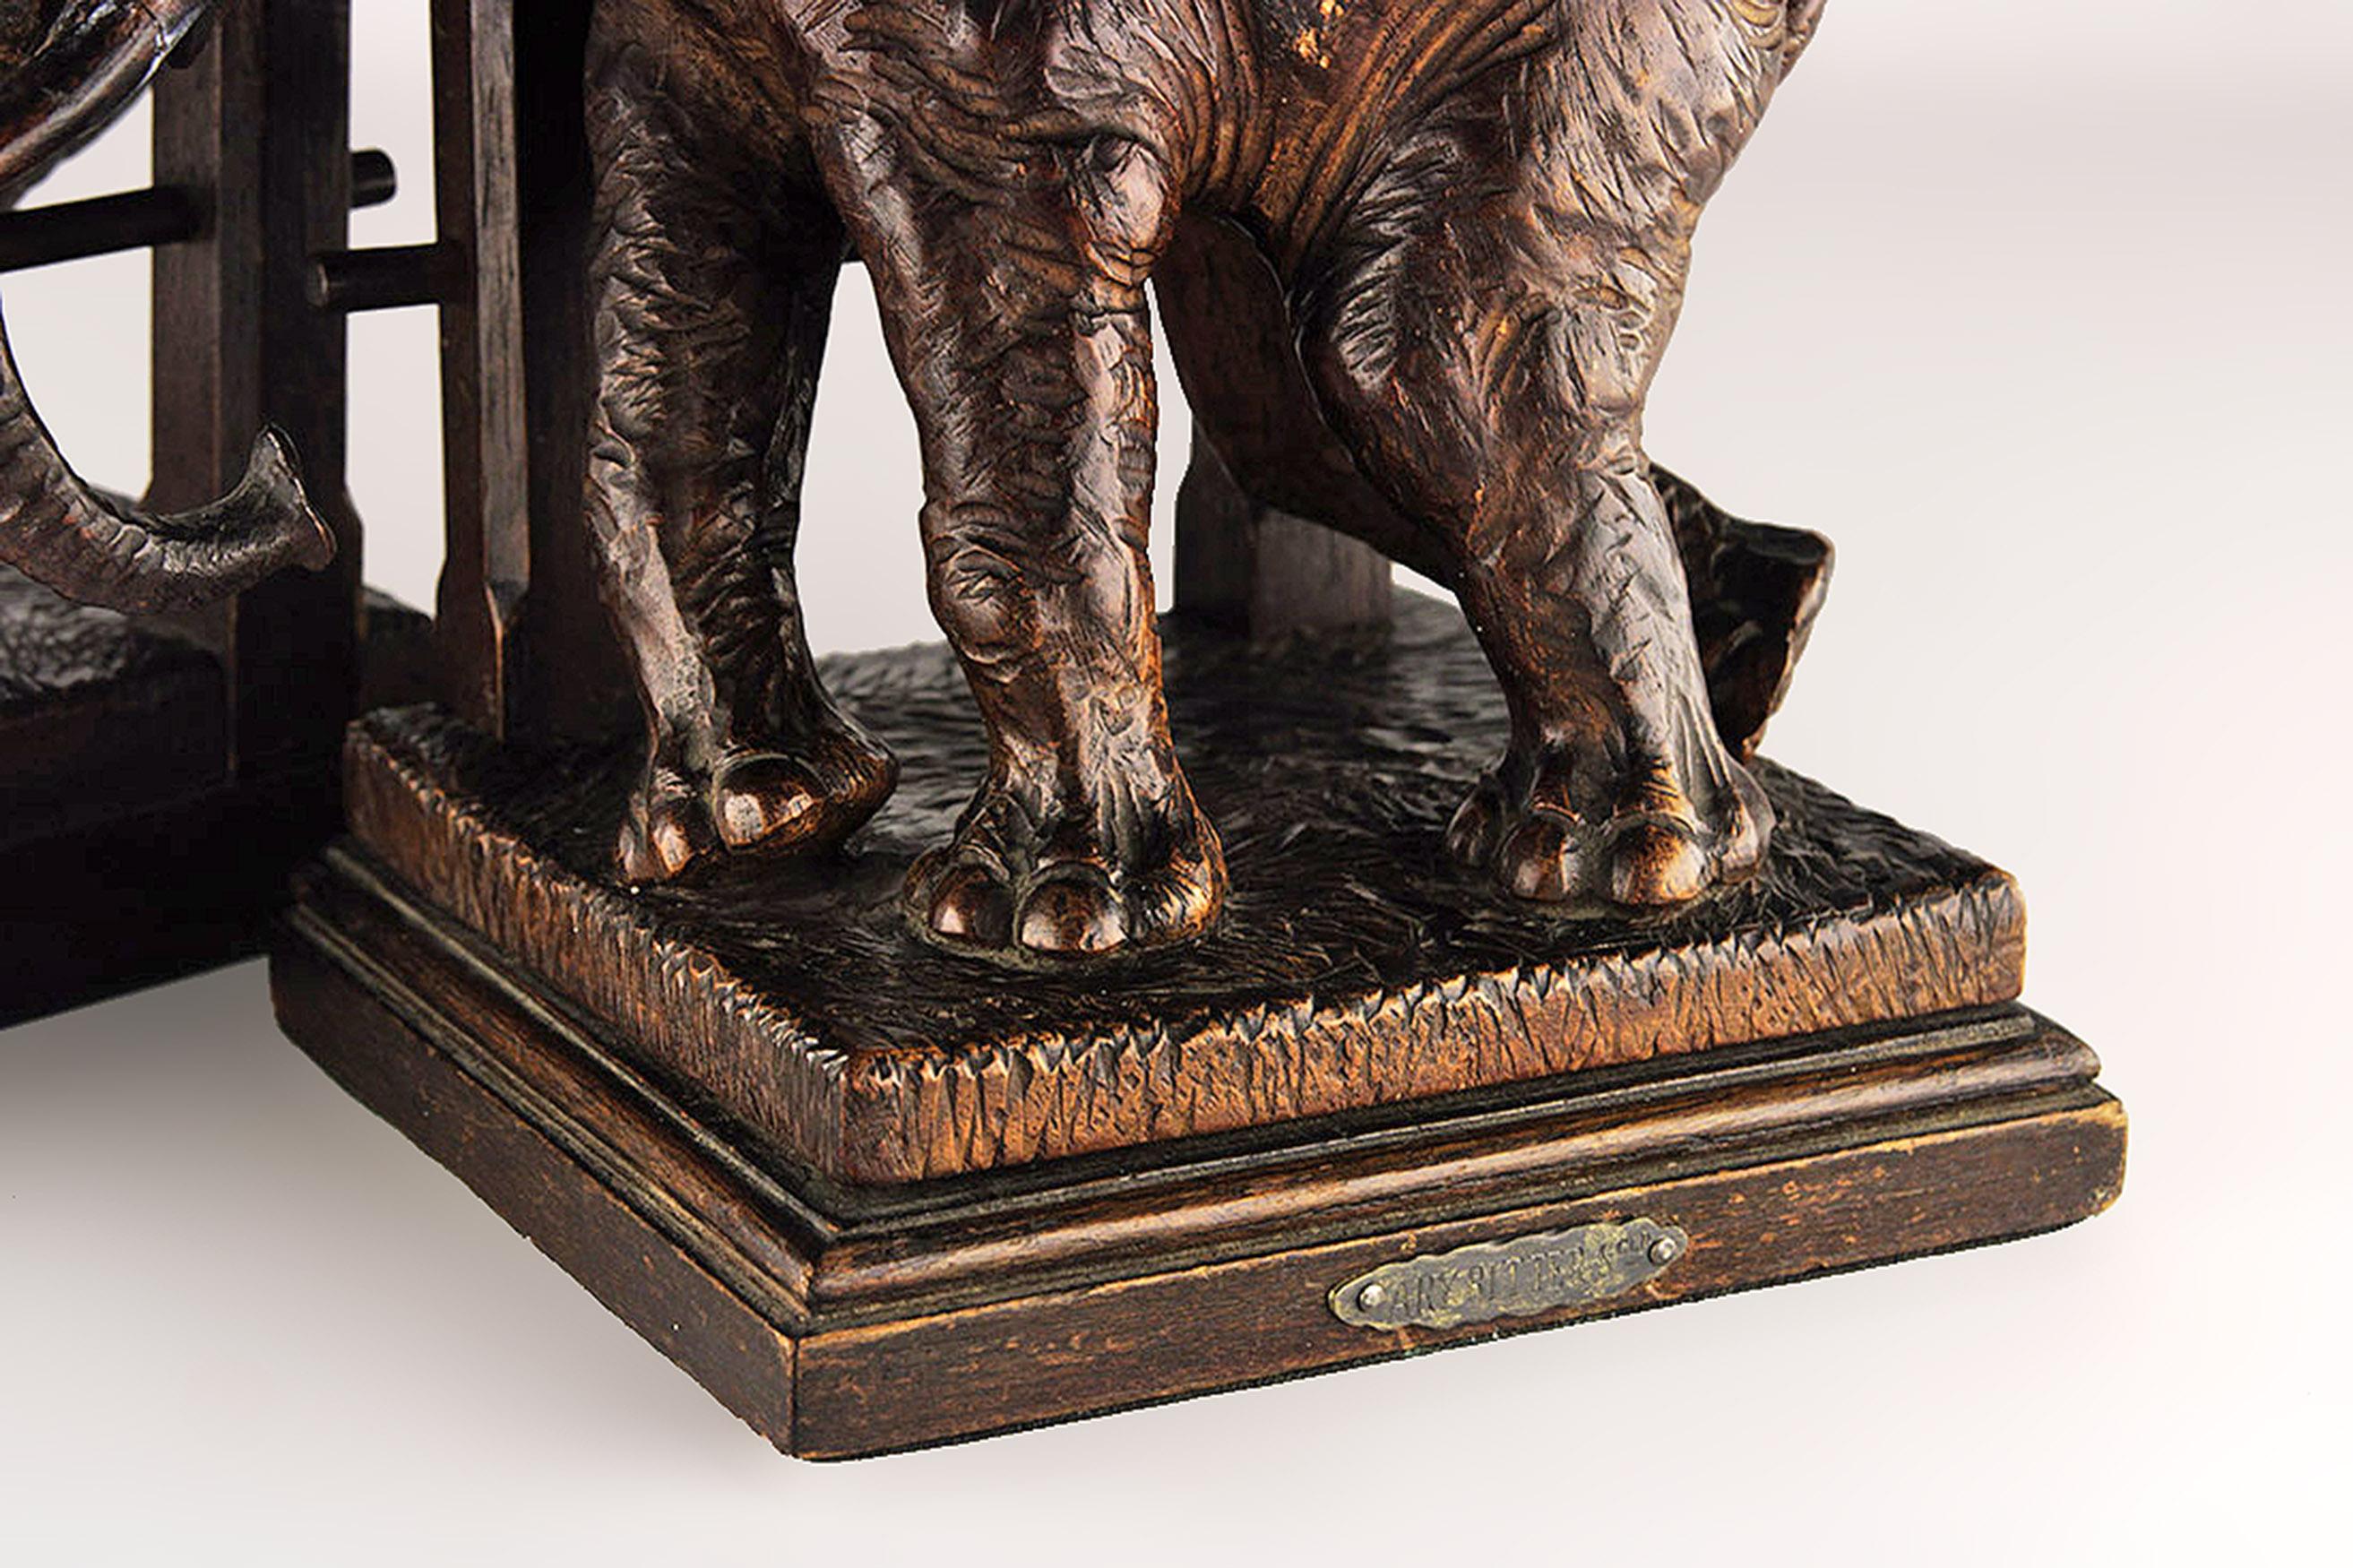 Pair of Early 20th Century Hand-Crafted Wooden Elephant Bookends by Ary Bitter In Good Condition For Sale In North Miami, FL